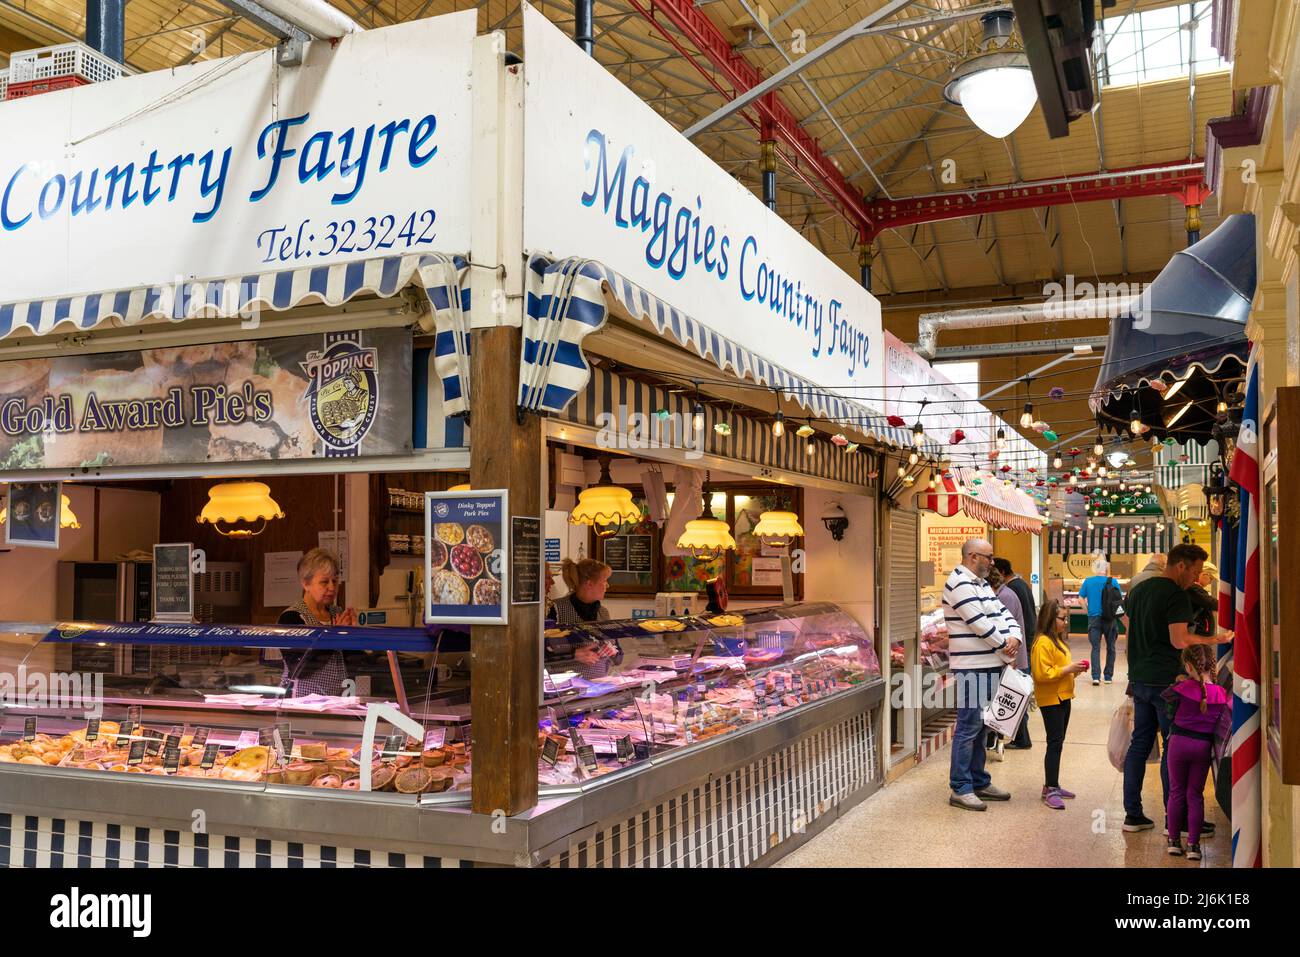 Doncaster indoor market stalls -with people shopping Doncaster market Doncaster South Yorkshire England UK GB Europe Stock Photo